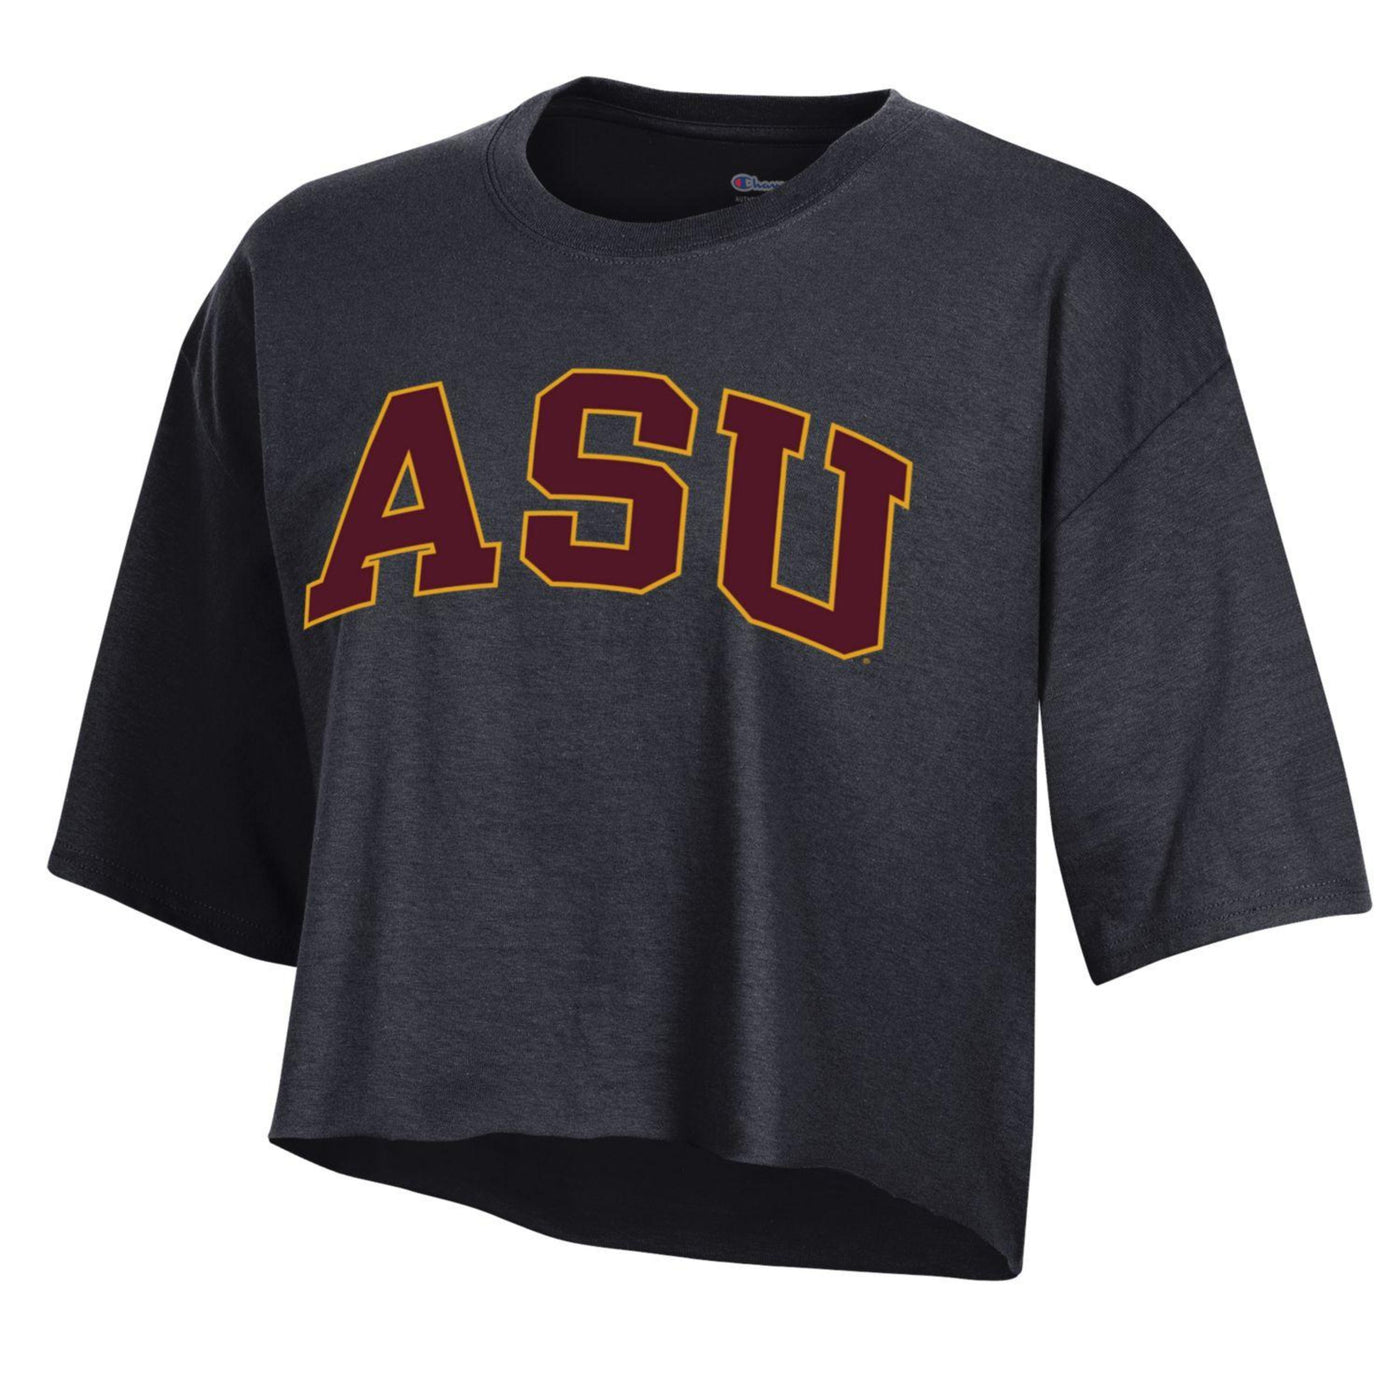 ASU black cropped tee featuring ASU in college font on the chest. ASU text is maroon with gold outline. 